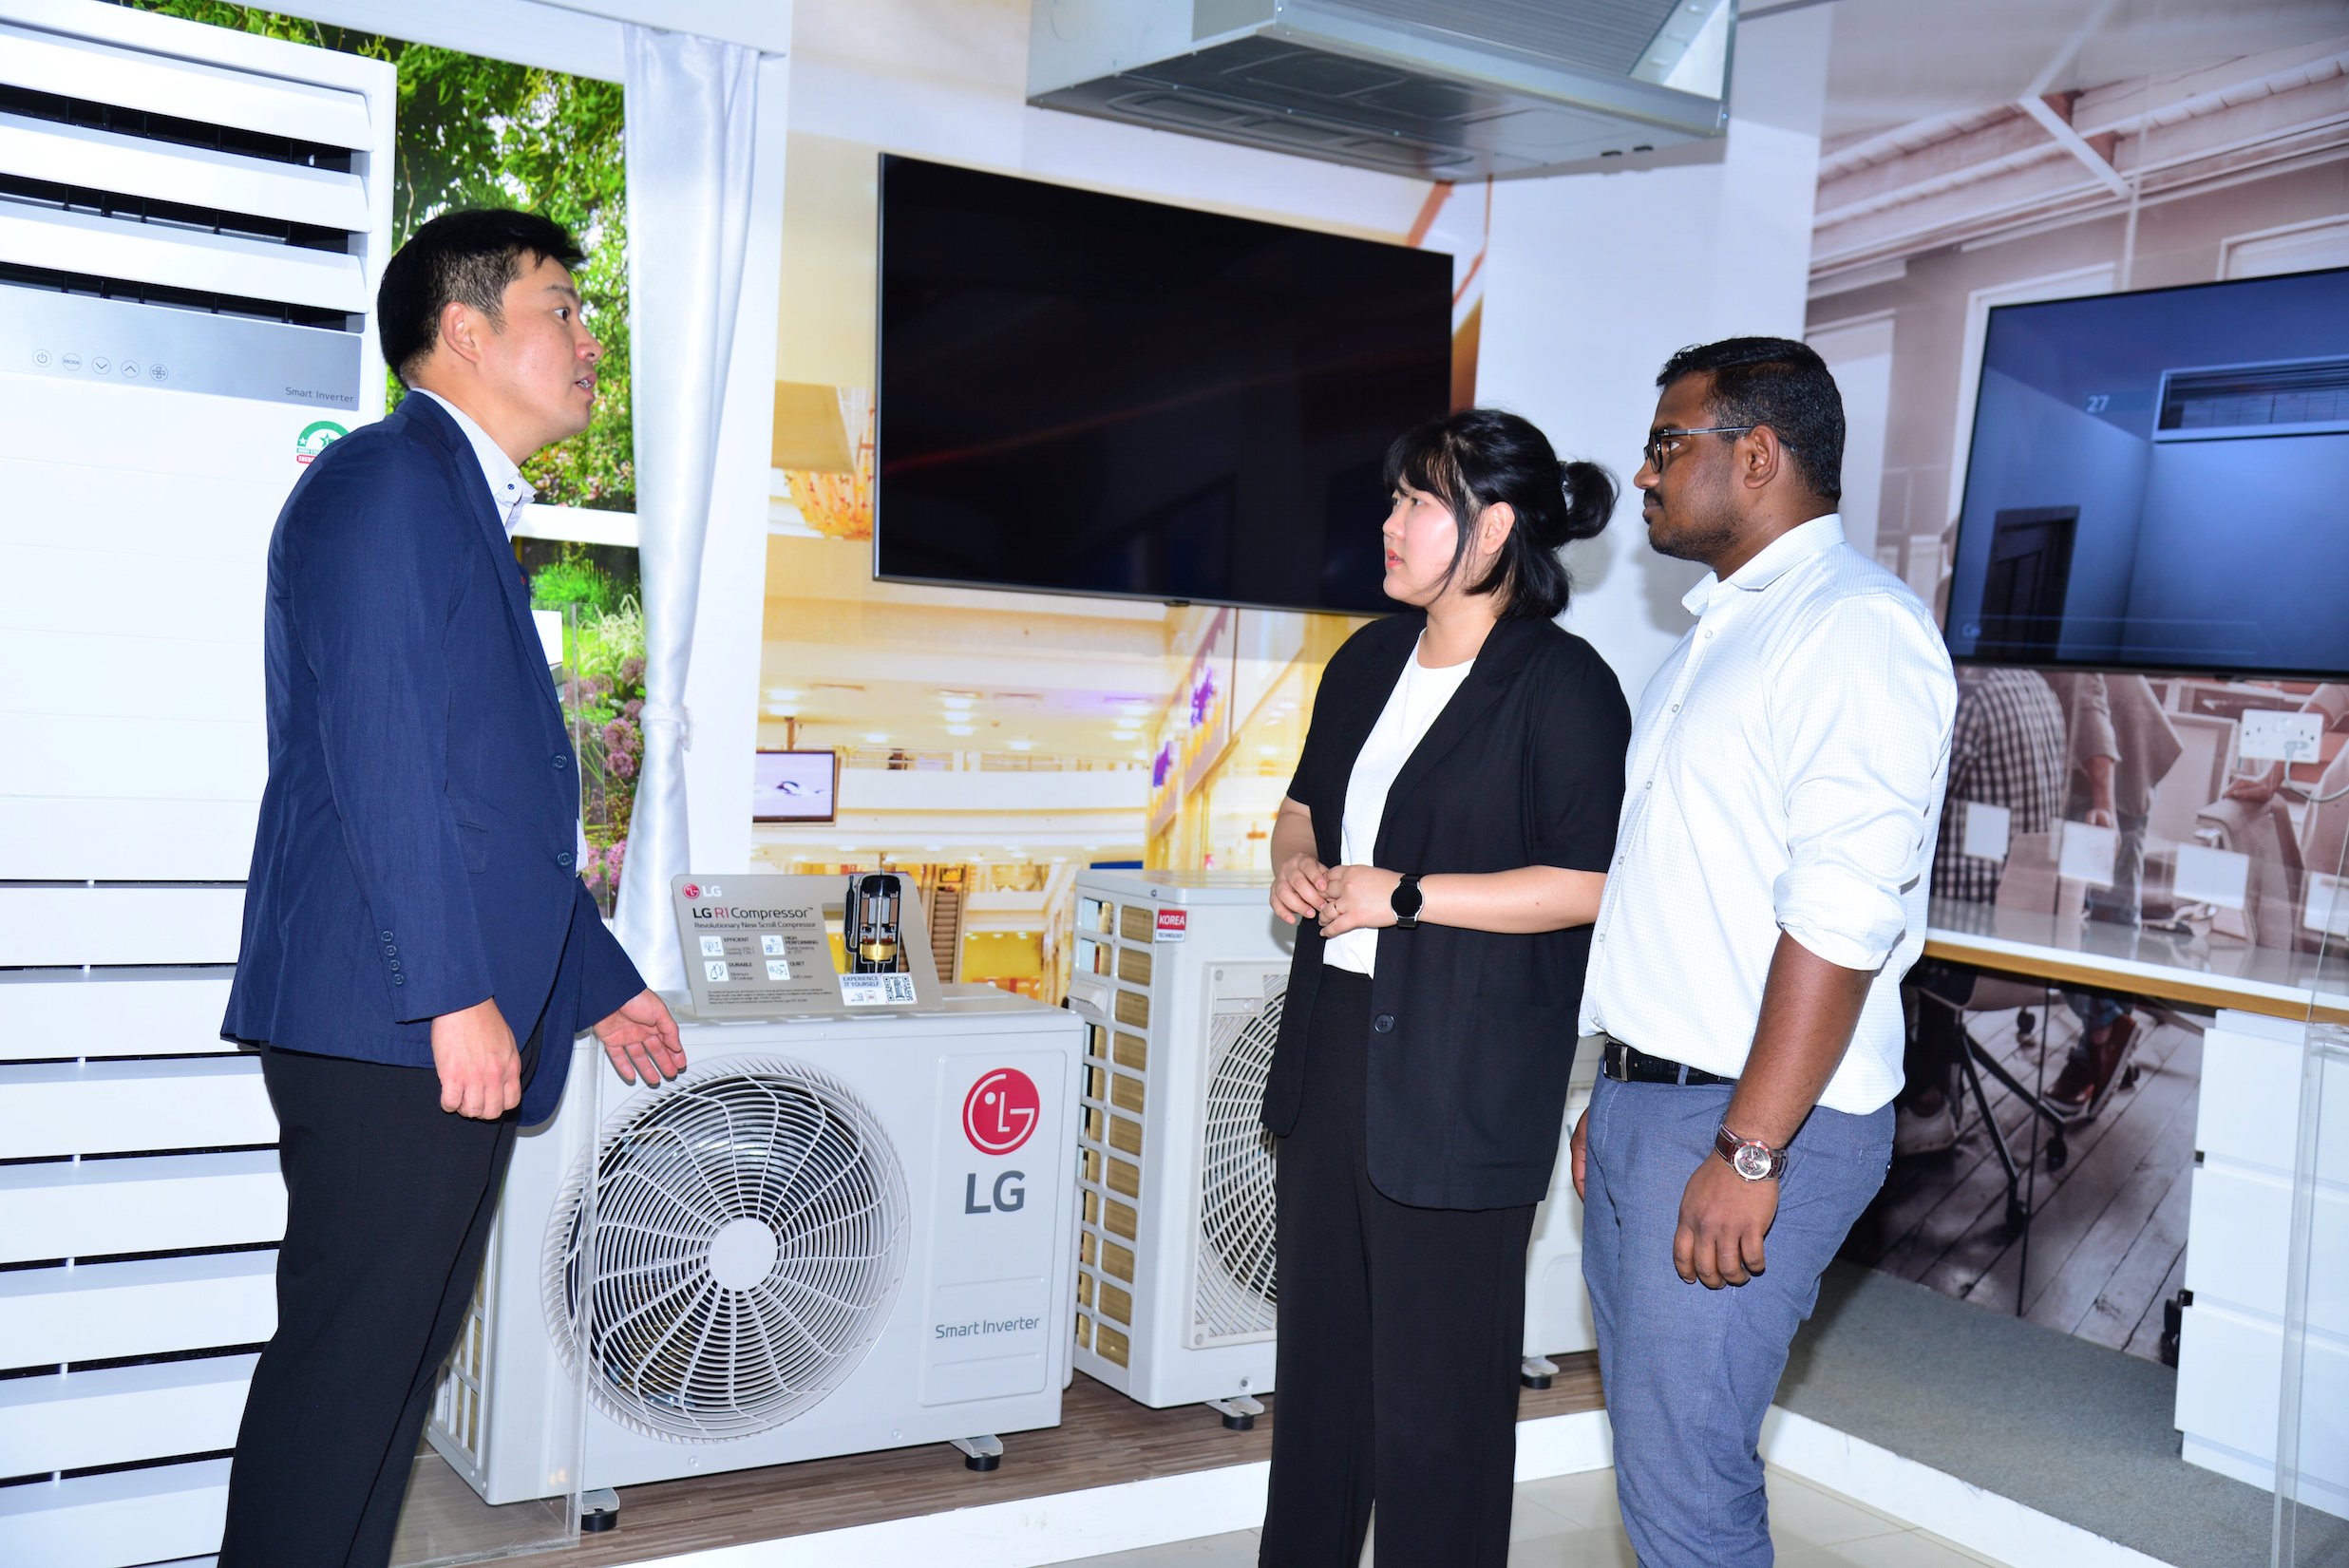 (L-R), LG Electronics Air Solution Product Manager Yeonguk Yun explains some of the LG Electronics air solutions technology to Korean Language & Culture Centre - K.U lecturer Yeonguk Yun and LG Electronics B2B Technical Manager Raja Durai. This took place during an excursion at LG offices by students from the said school, providing an opportunity for the LG team to introduce the students to the Korean work environment.